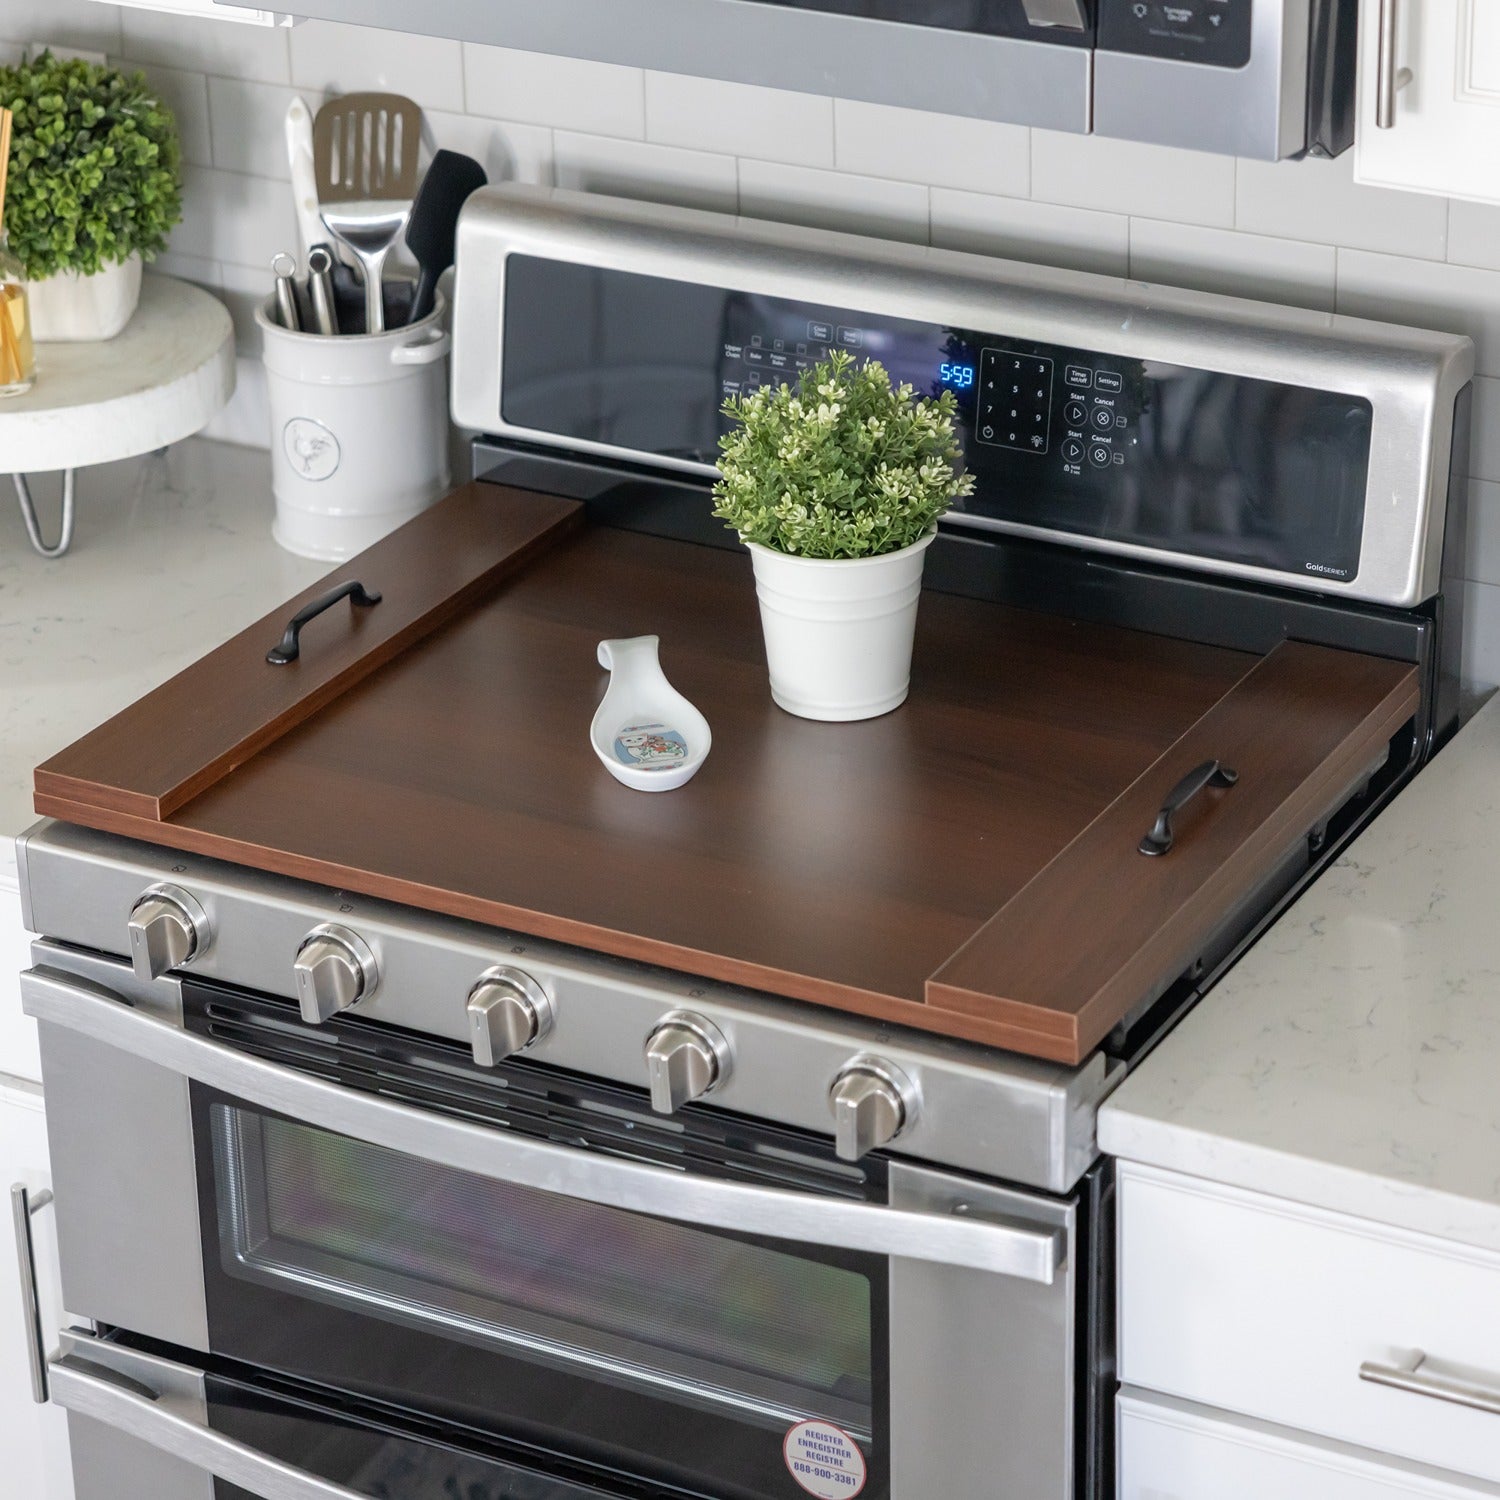 Noodle Board Stove Covers (Cognac Brown)  Laminate Wood Farmhouse Sto –  Relodecor